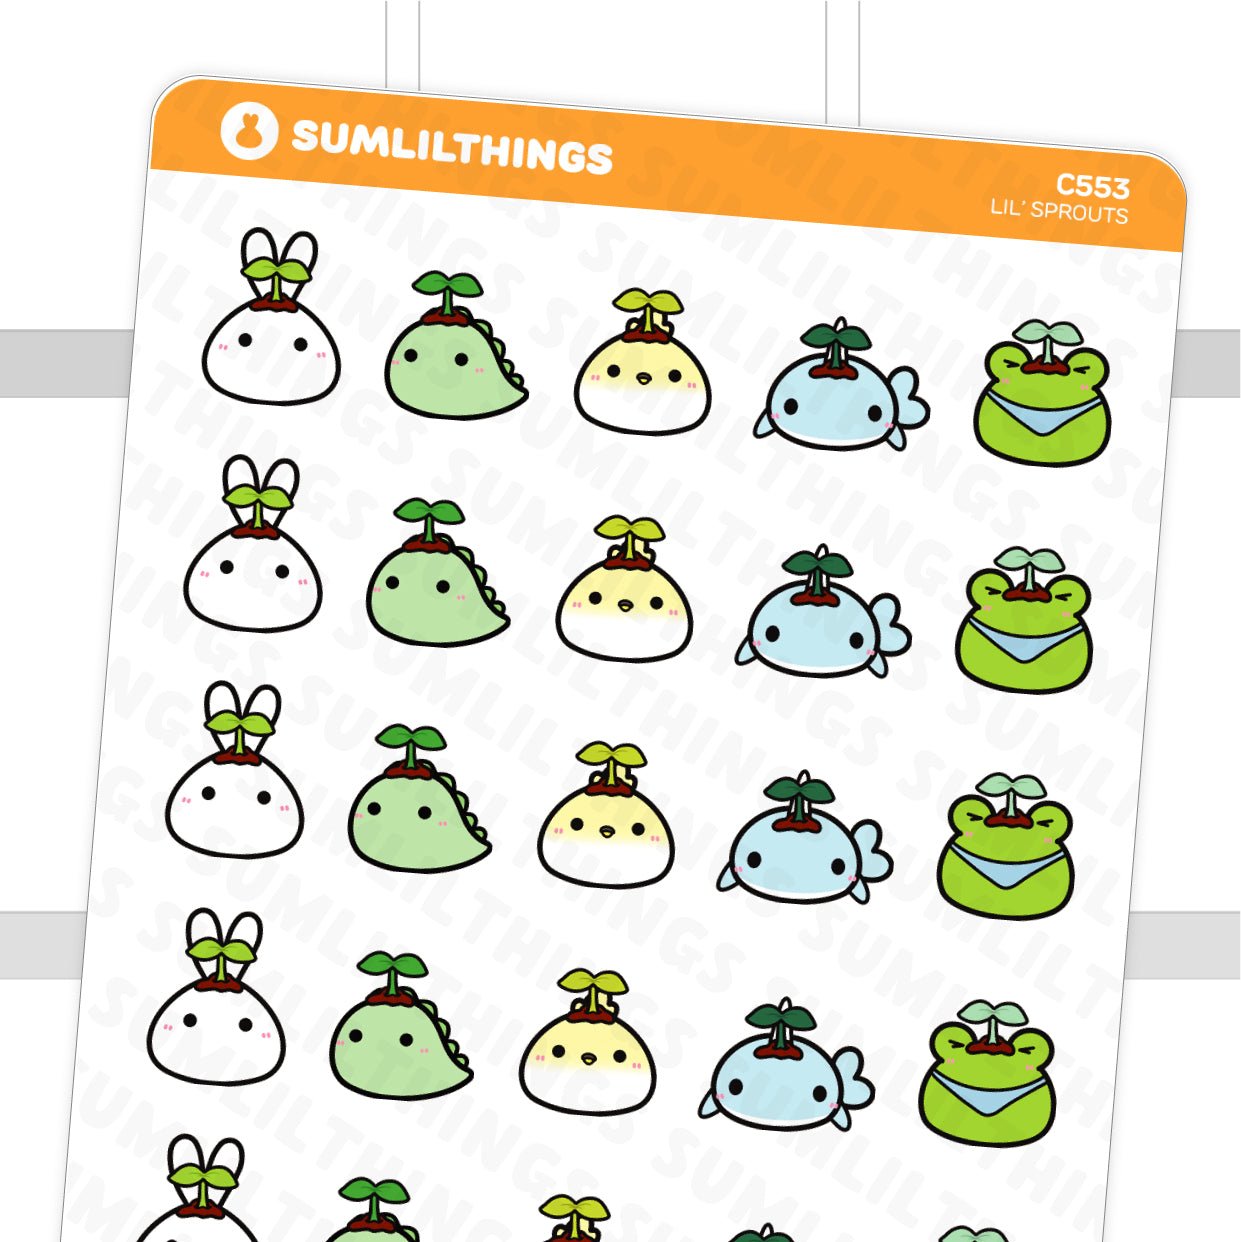 Lil' Sprouts Stickers - SumLilThings